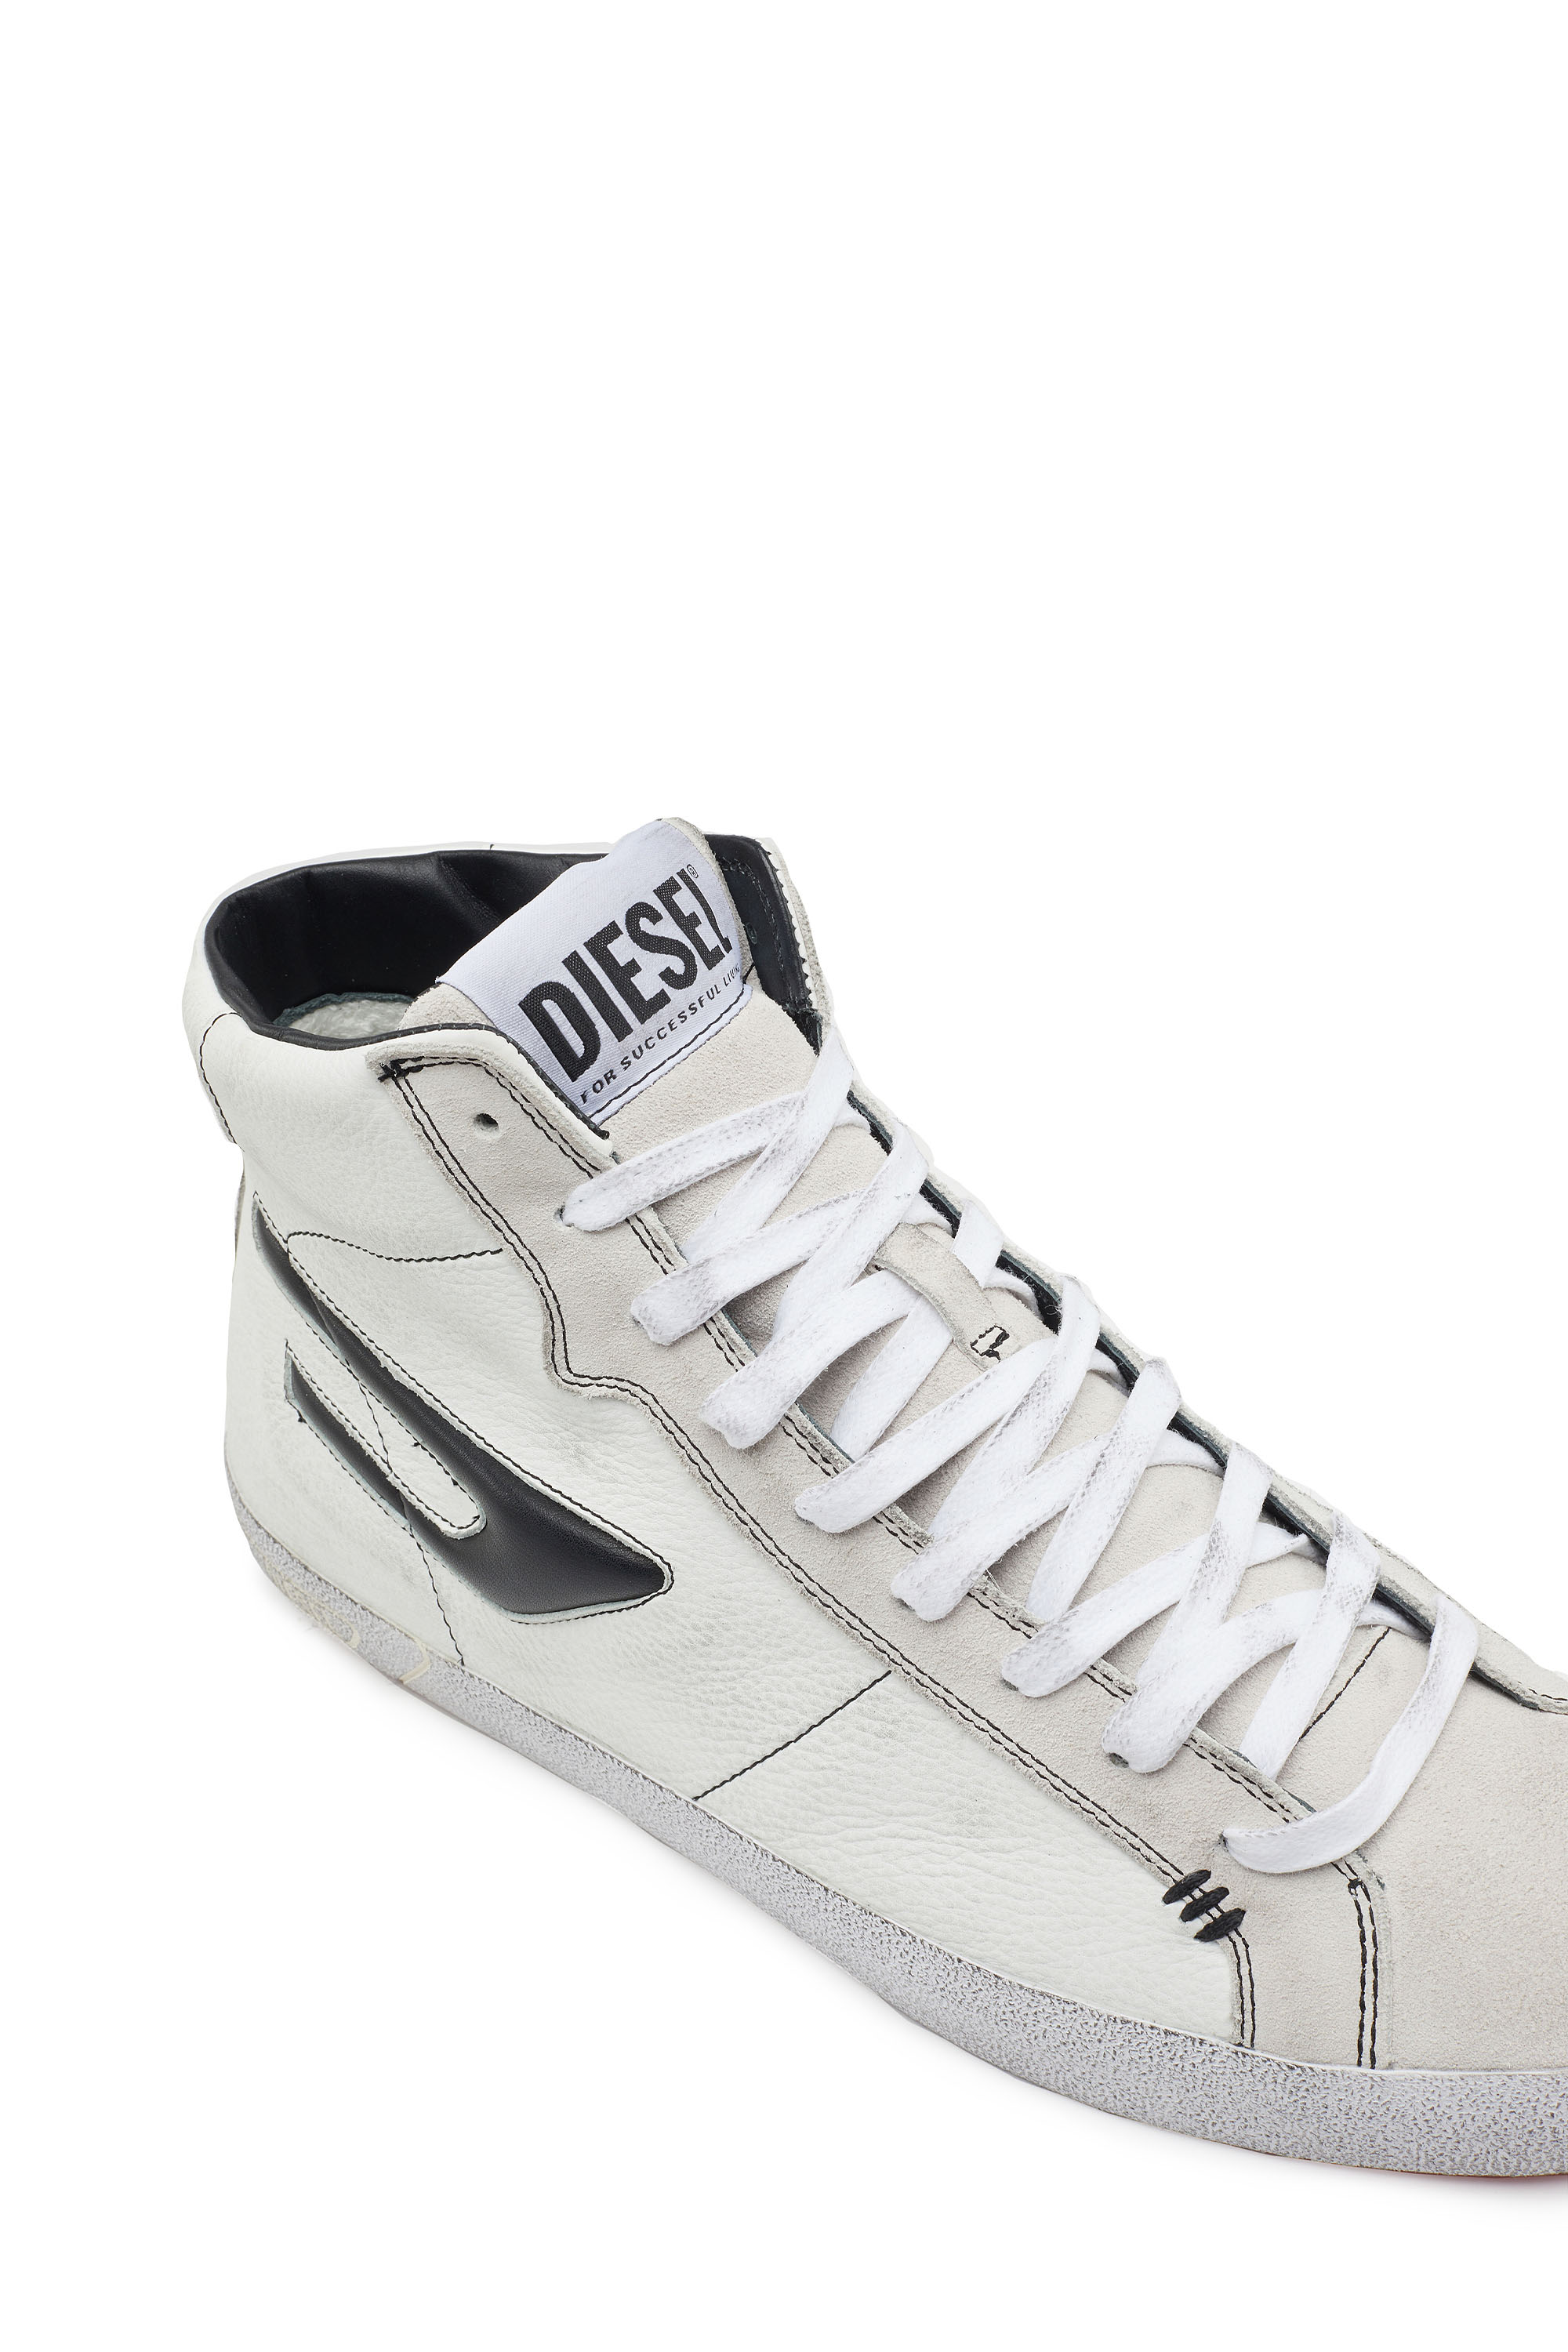 Diesel - S-LEROJI MID, Man S-Leroji Mid - High-top leather sneakers with D logo in White - Image 6